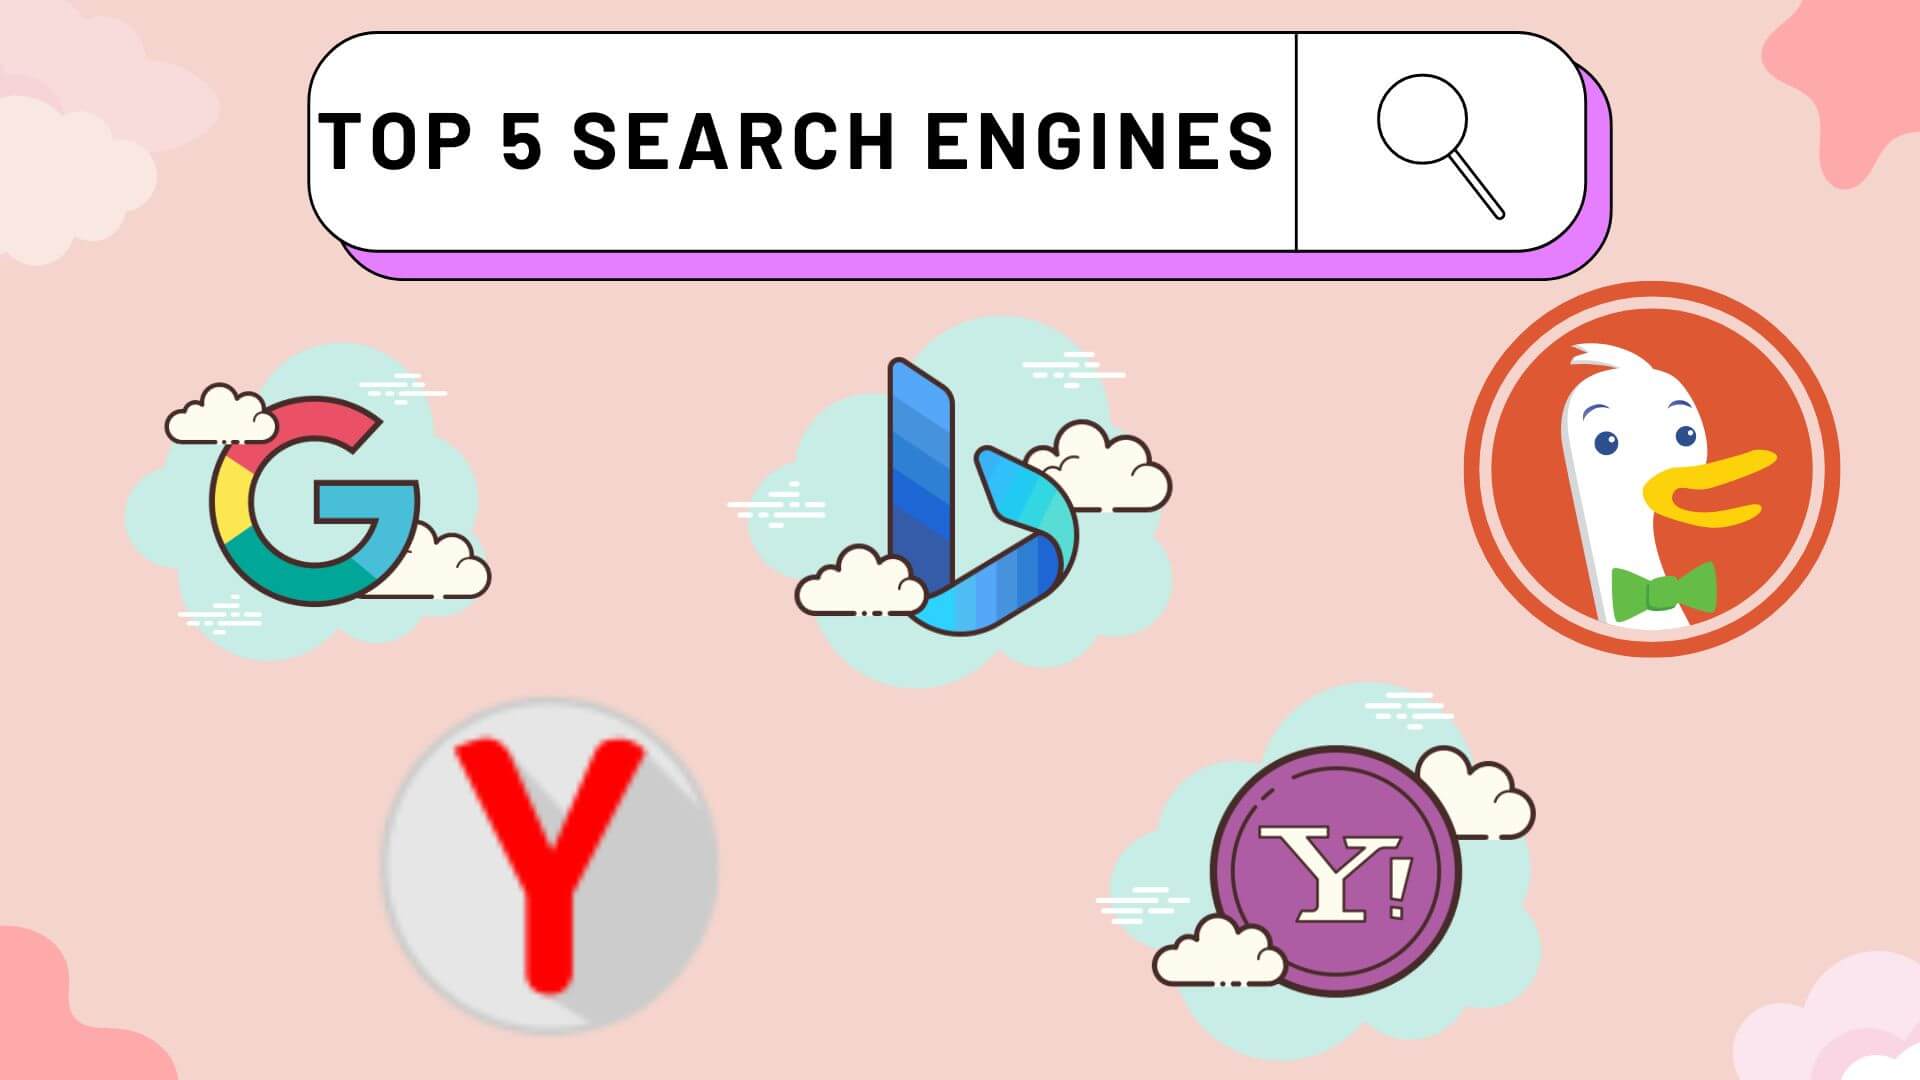 Creative Showing top 5 Search Engines Includes